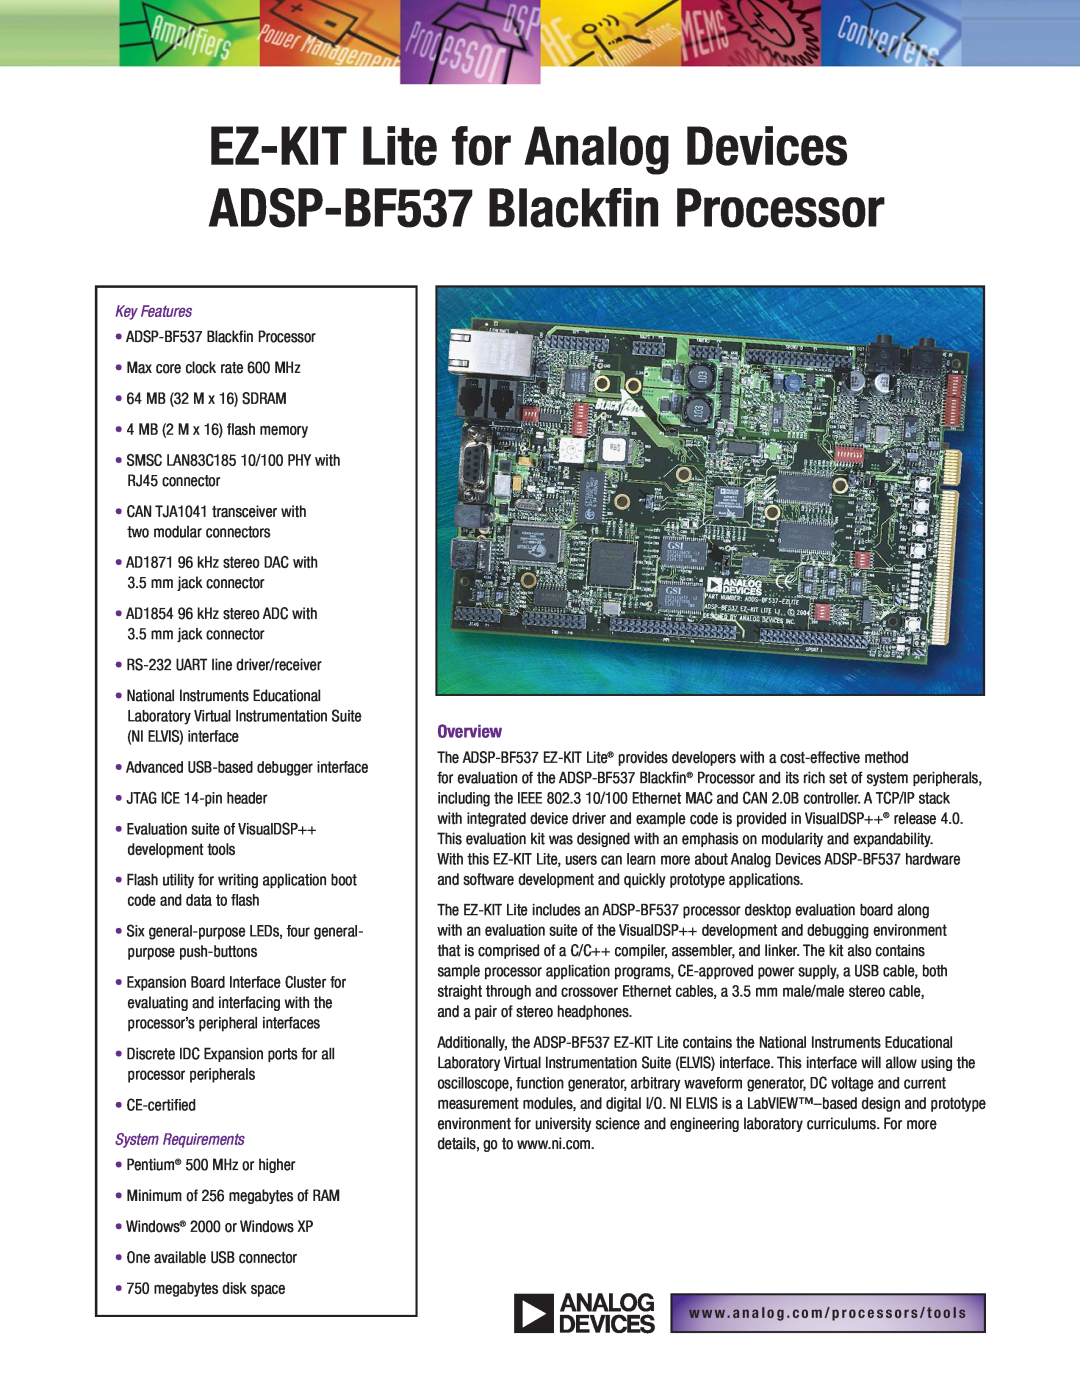 Analog Devices manual Overview, EZ-KIT Lite for Analog Devices ADSP-BF537 Blackﬁn Processor, Key Features 